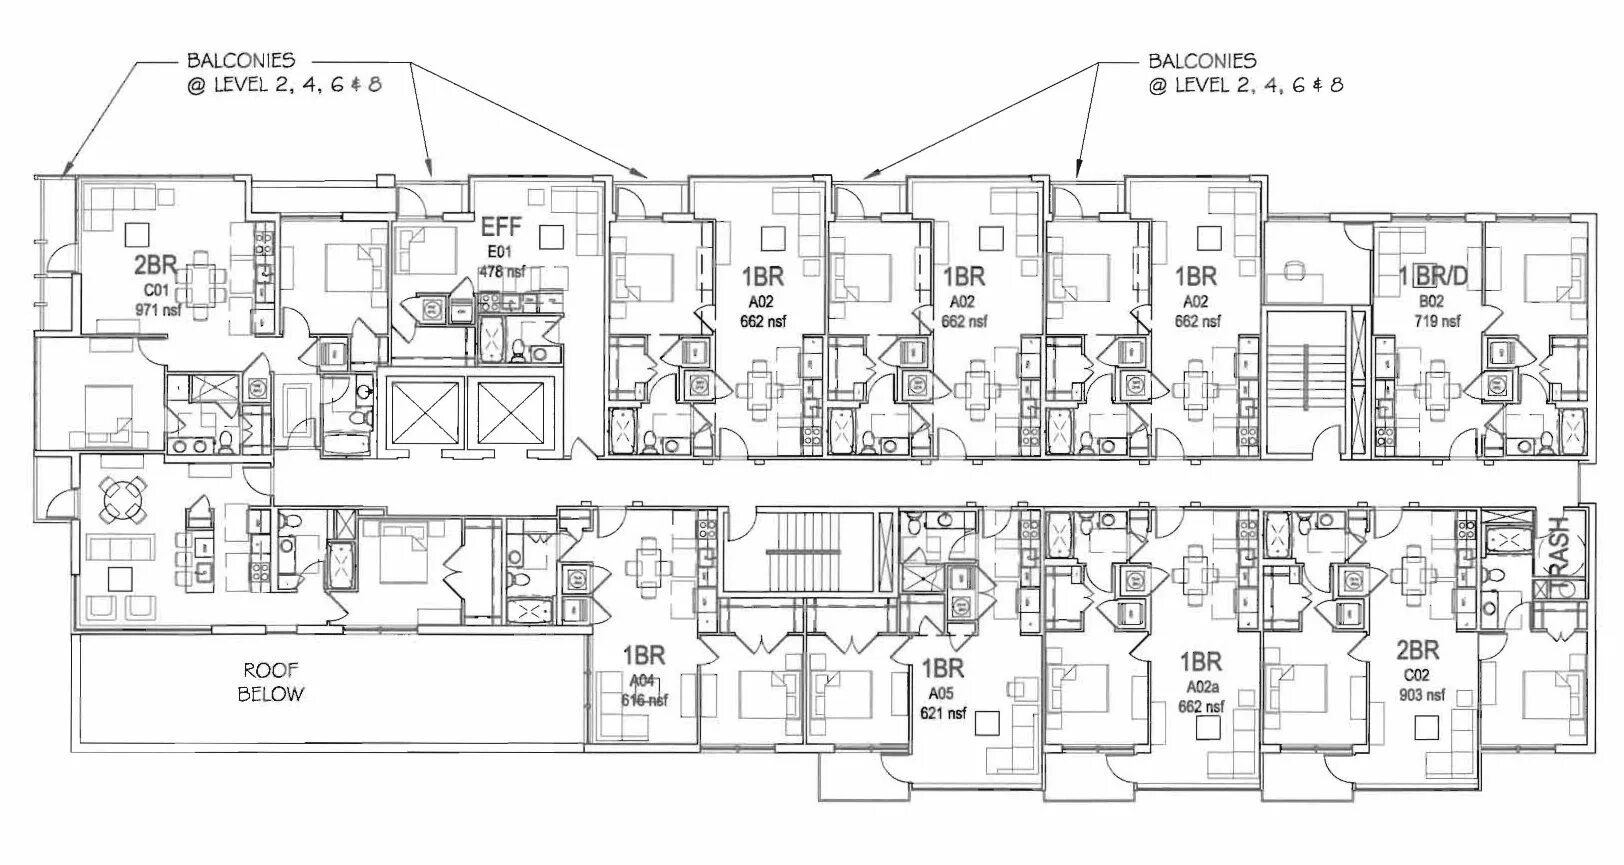 Apartment buildings Канада Plan. 3-Story Apartment building Floor Plan. American Apartment building Plans. Apartment buildings Plan Atlas. Planning for a building